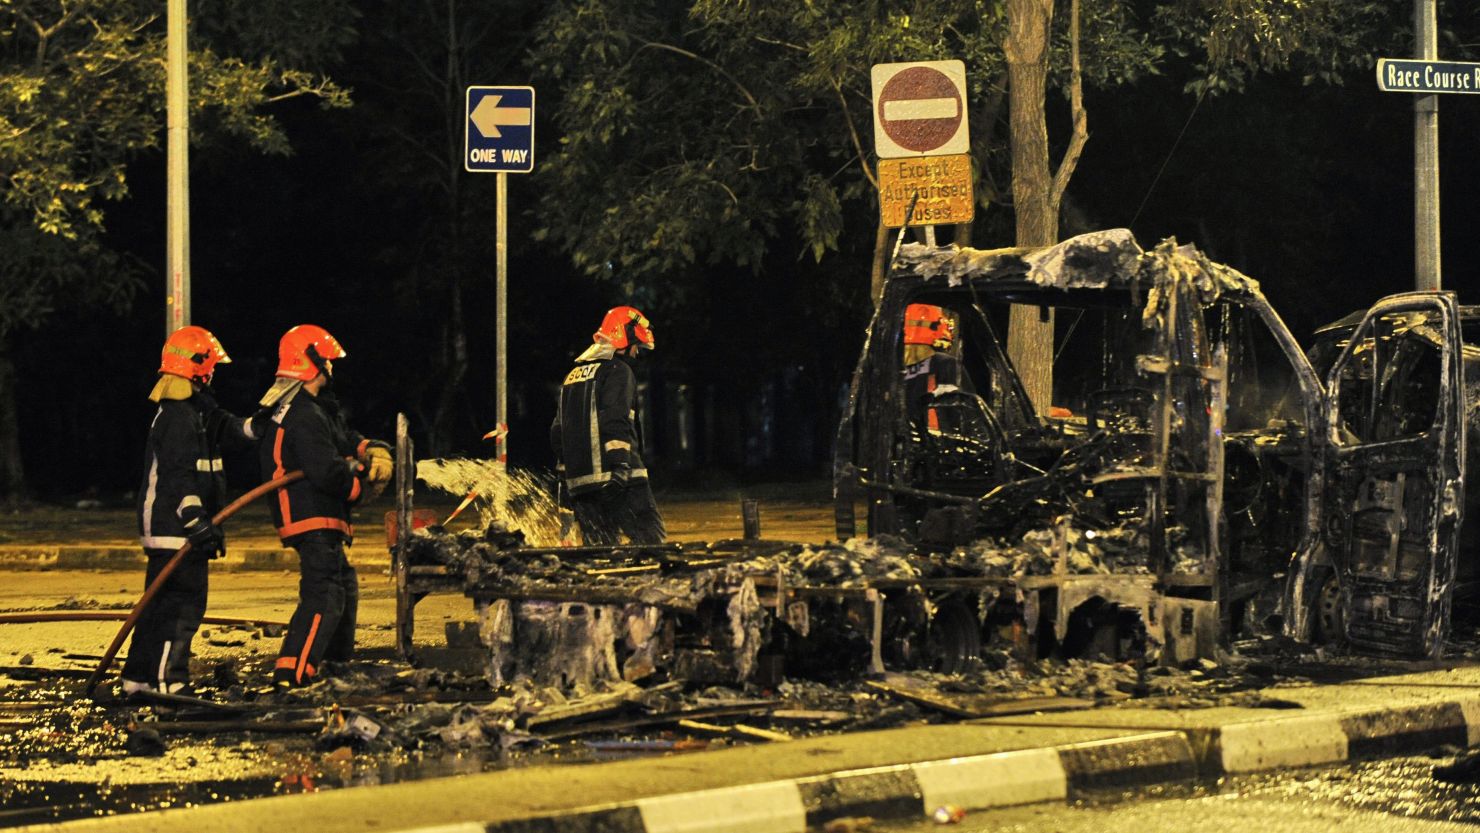 Firemen douse a charred ambulance in the early hours of December 9, 2013, after a fatal traffic accident sparked a riot in Singapore's Little India district.